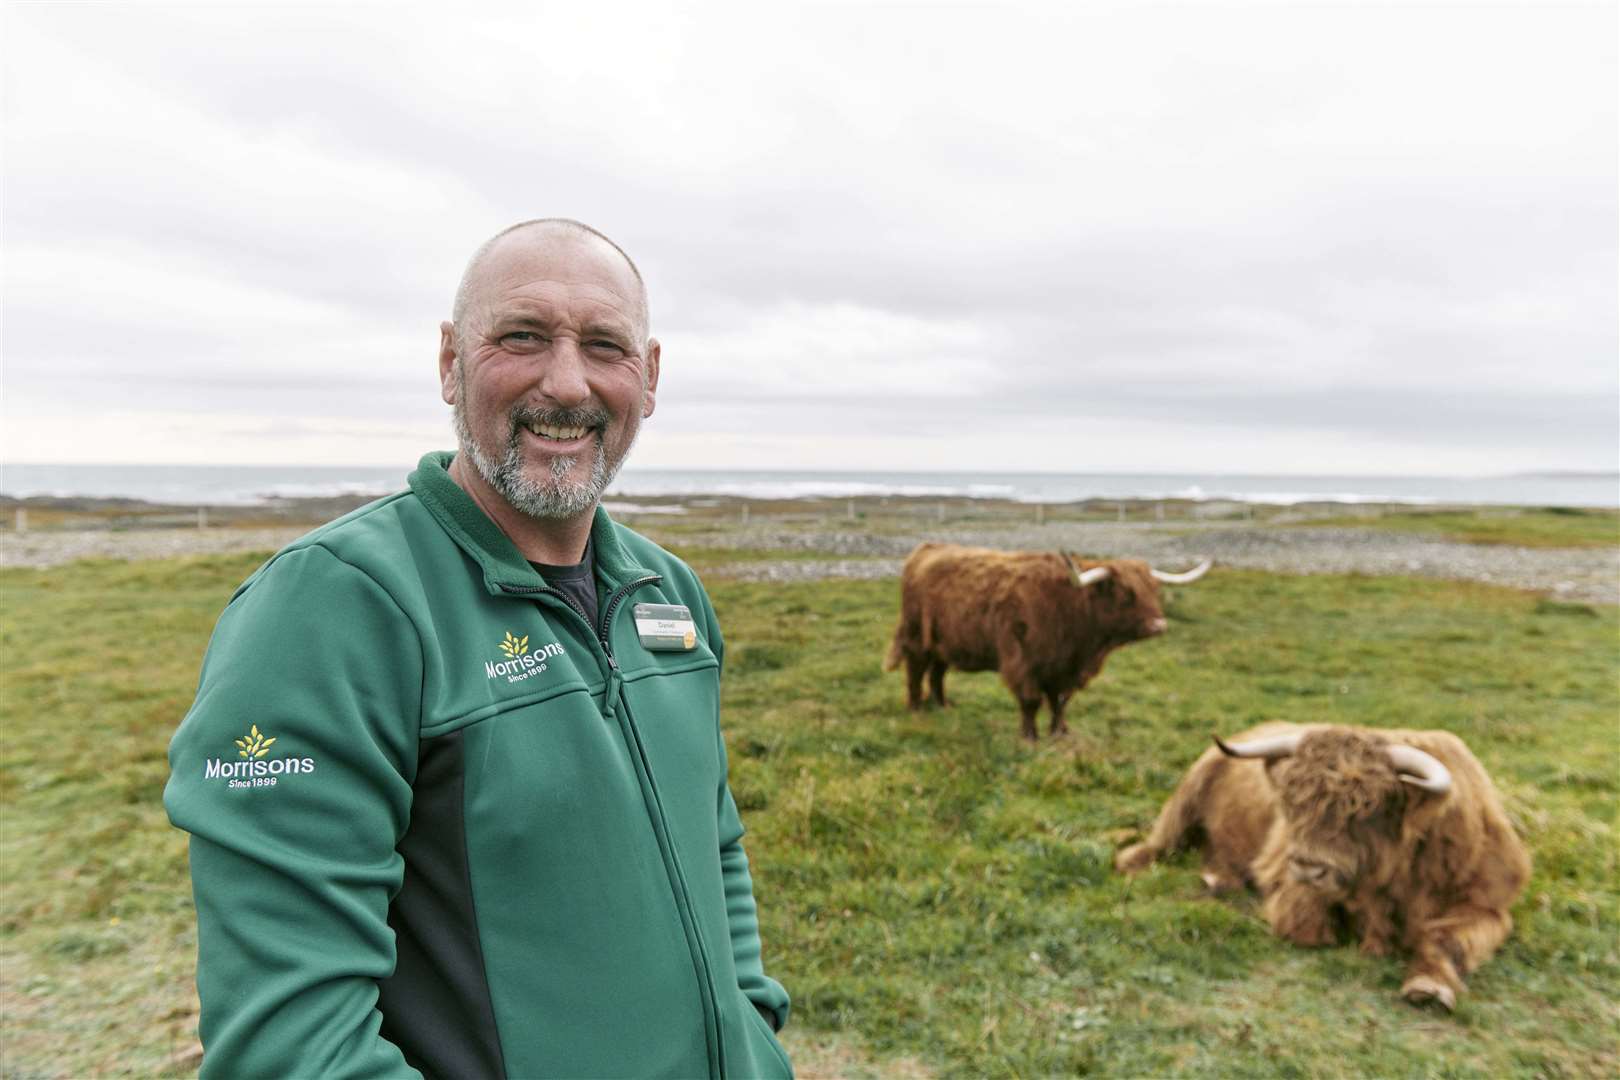 Morrisons is working with Queen’s University Belfast on a three-year trial looking at the use of seaweed from the UK in helping to reduce methane production in cattle